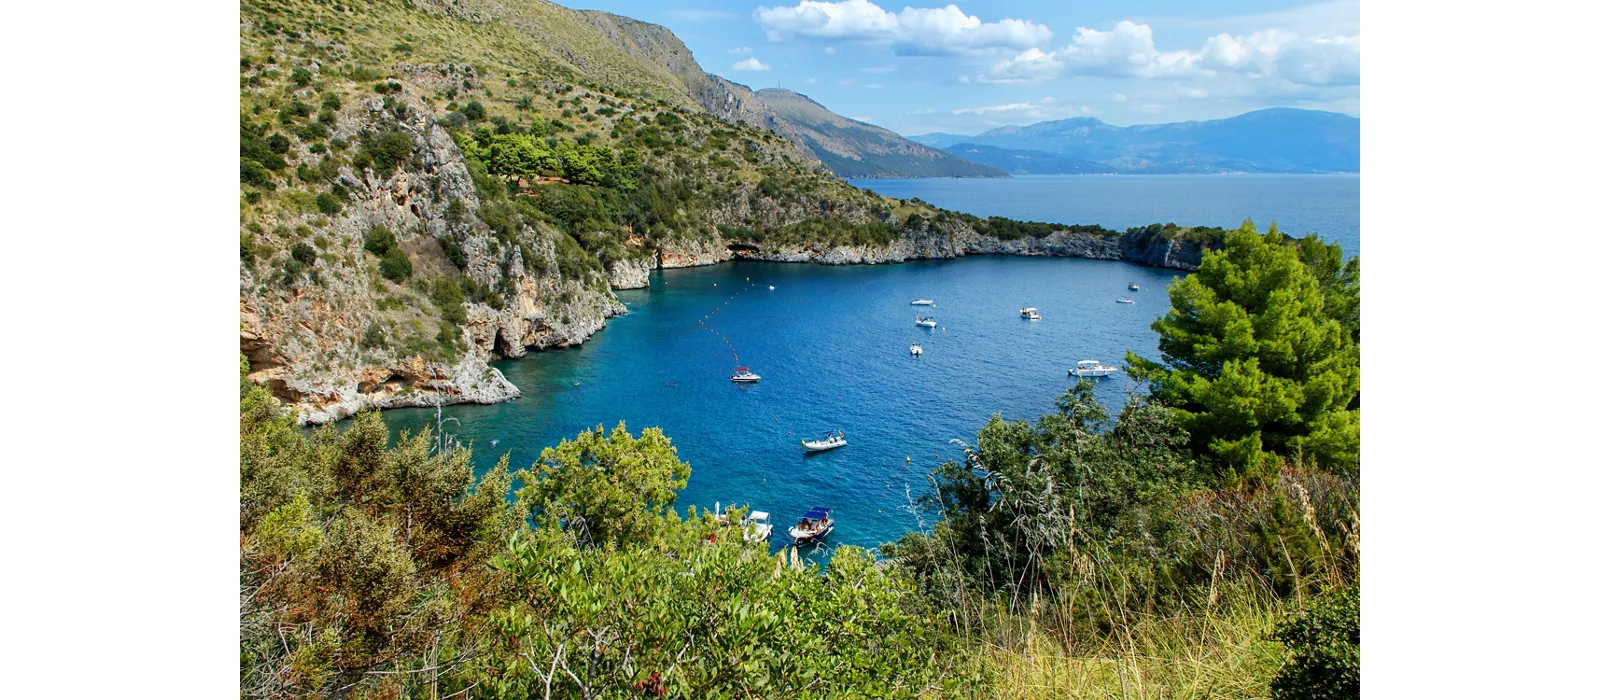 Green and blue Cilento: from the National Park to the cobalt blue sea